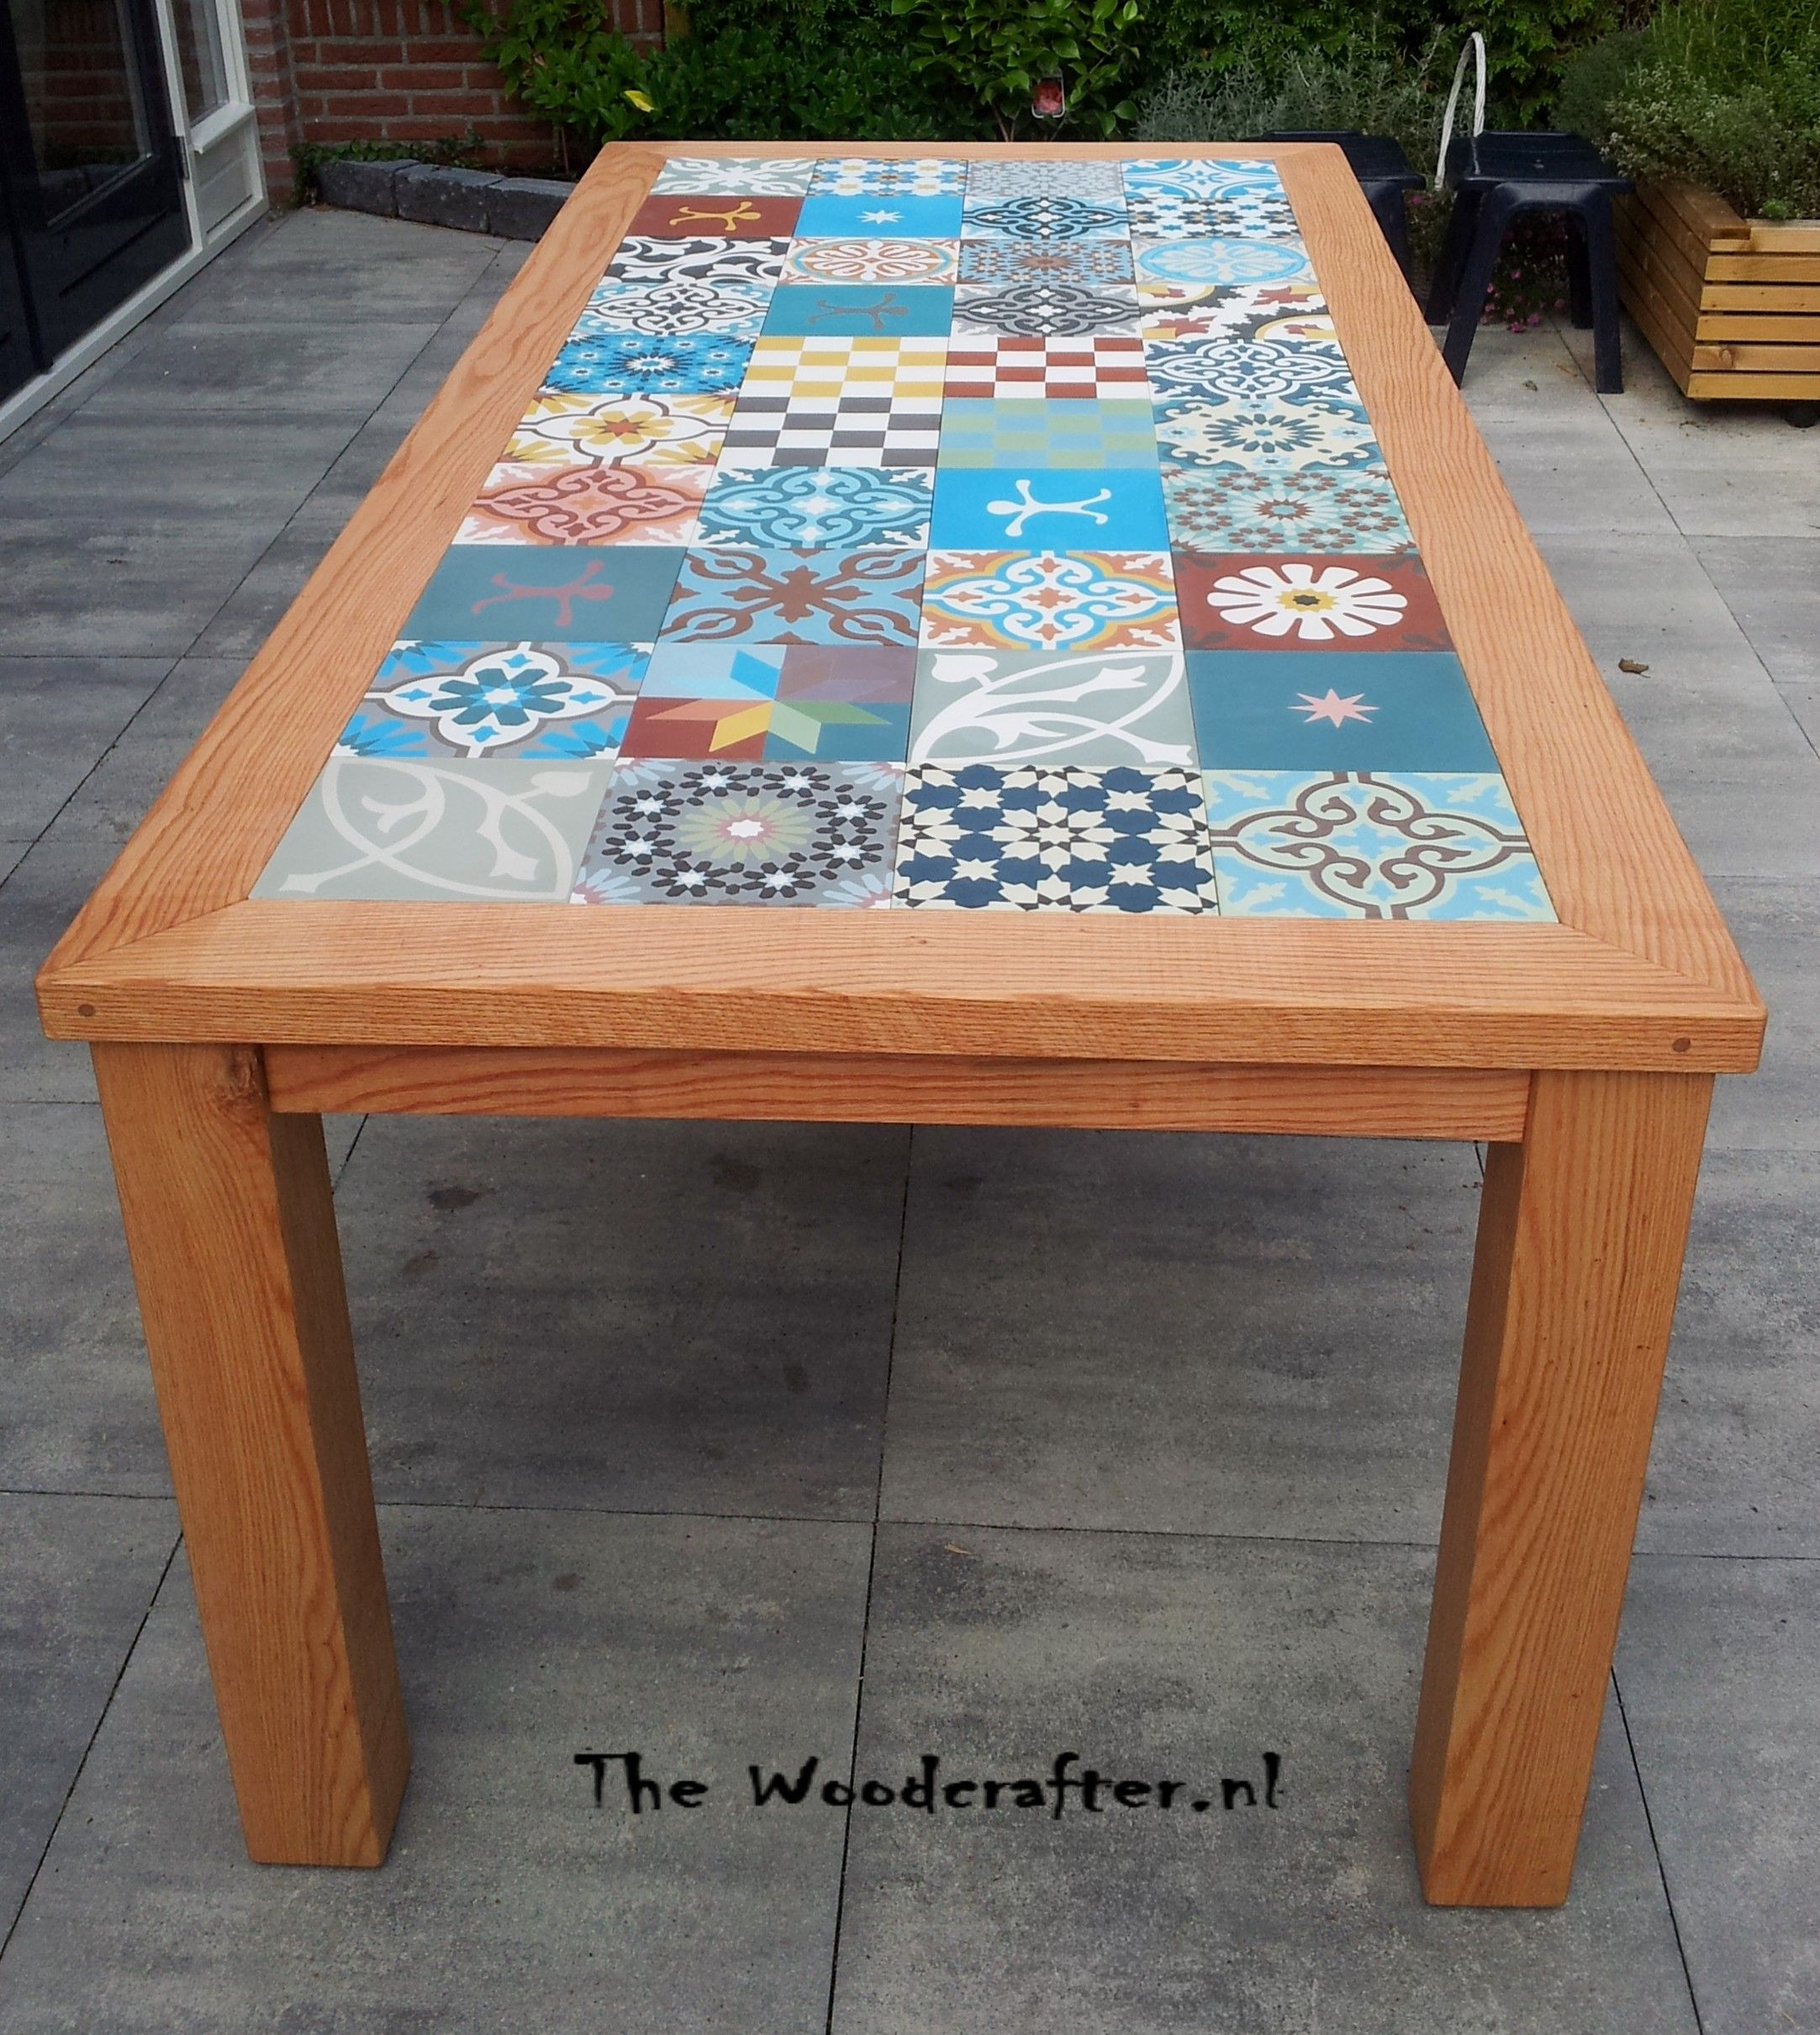 DIY Tile Table Top Outdoor
 Red American oak outdoor table with a Portugese tiled